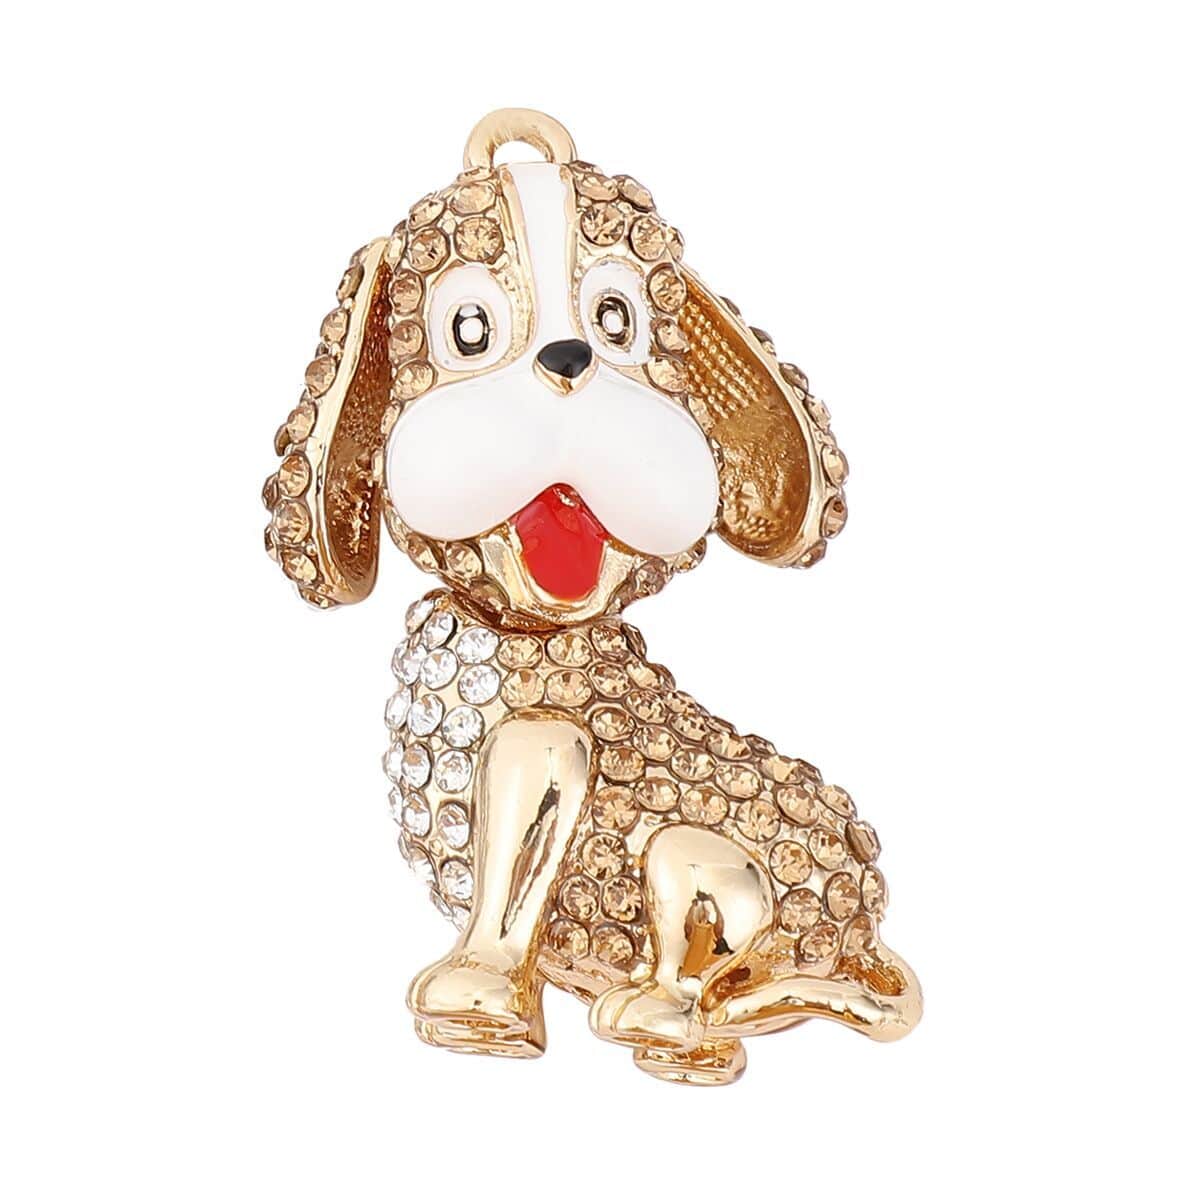 Champagne and White Austrian Crystal and Enameled Dog Keychain and Mirror in Goldtone, Crystal Keychain and Compact Mirror for Purse, Handbag Keychain image number 5